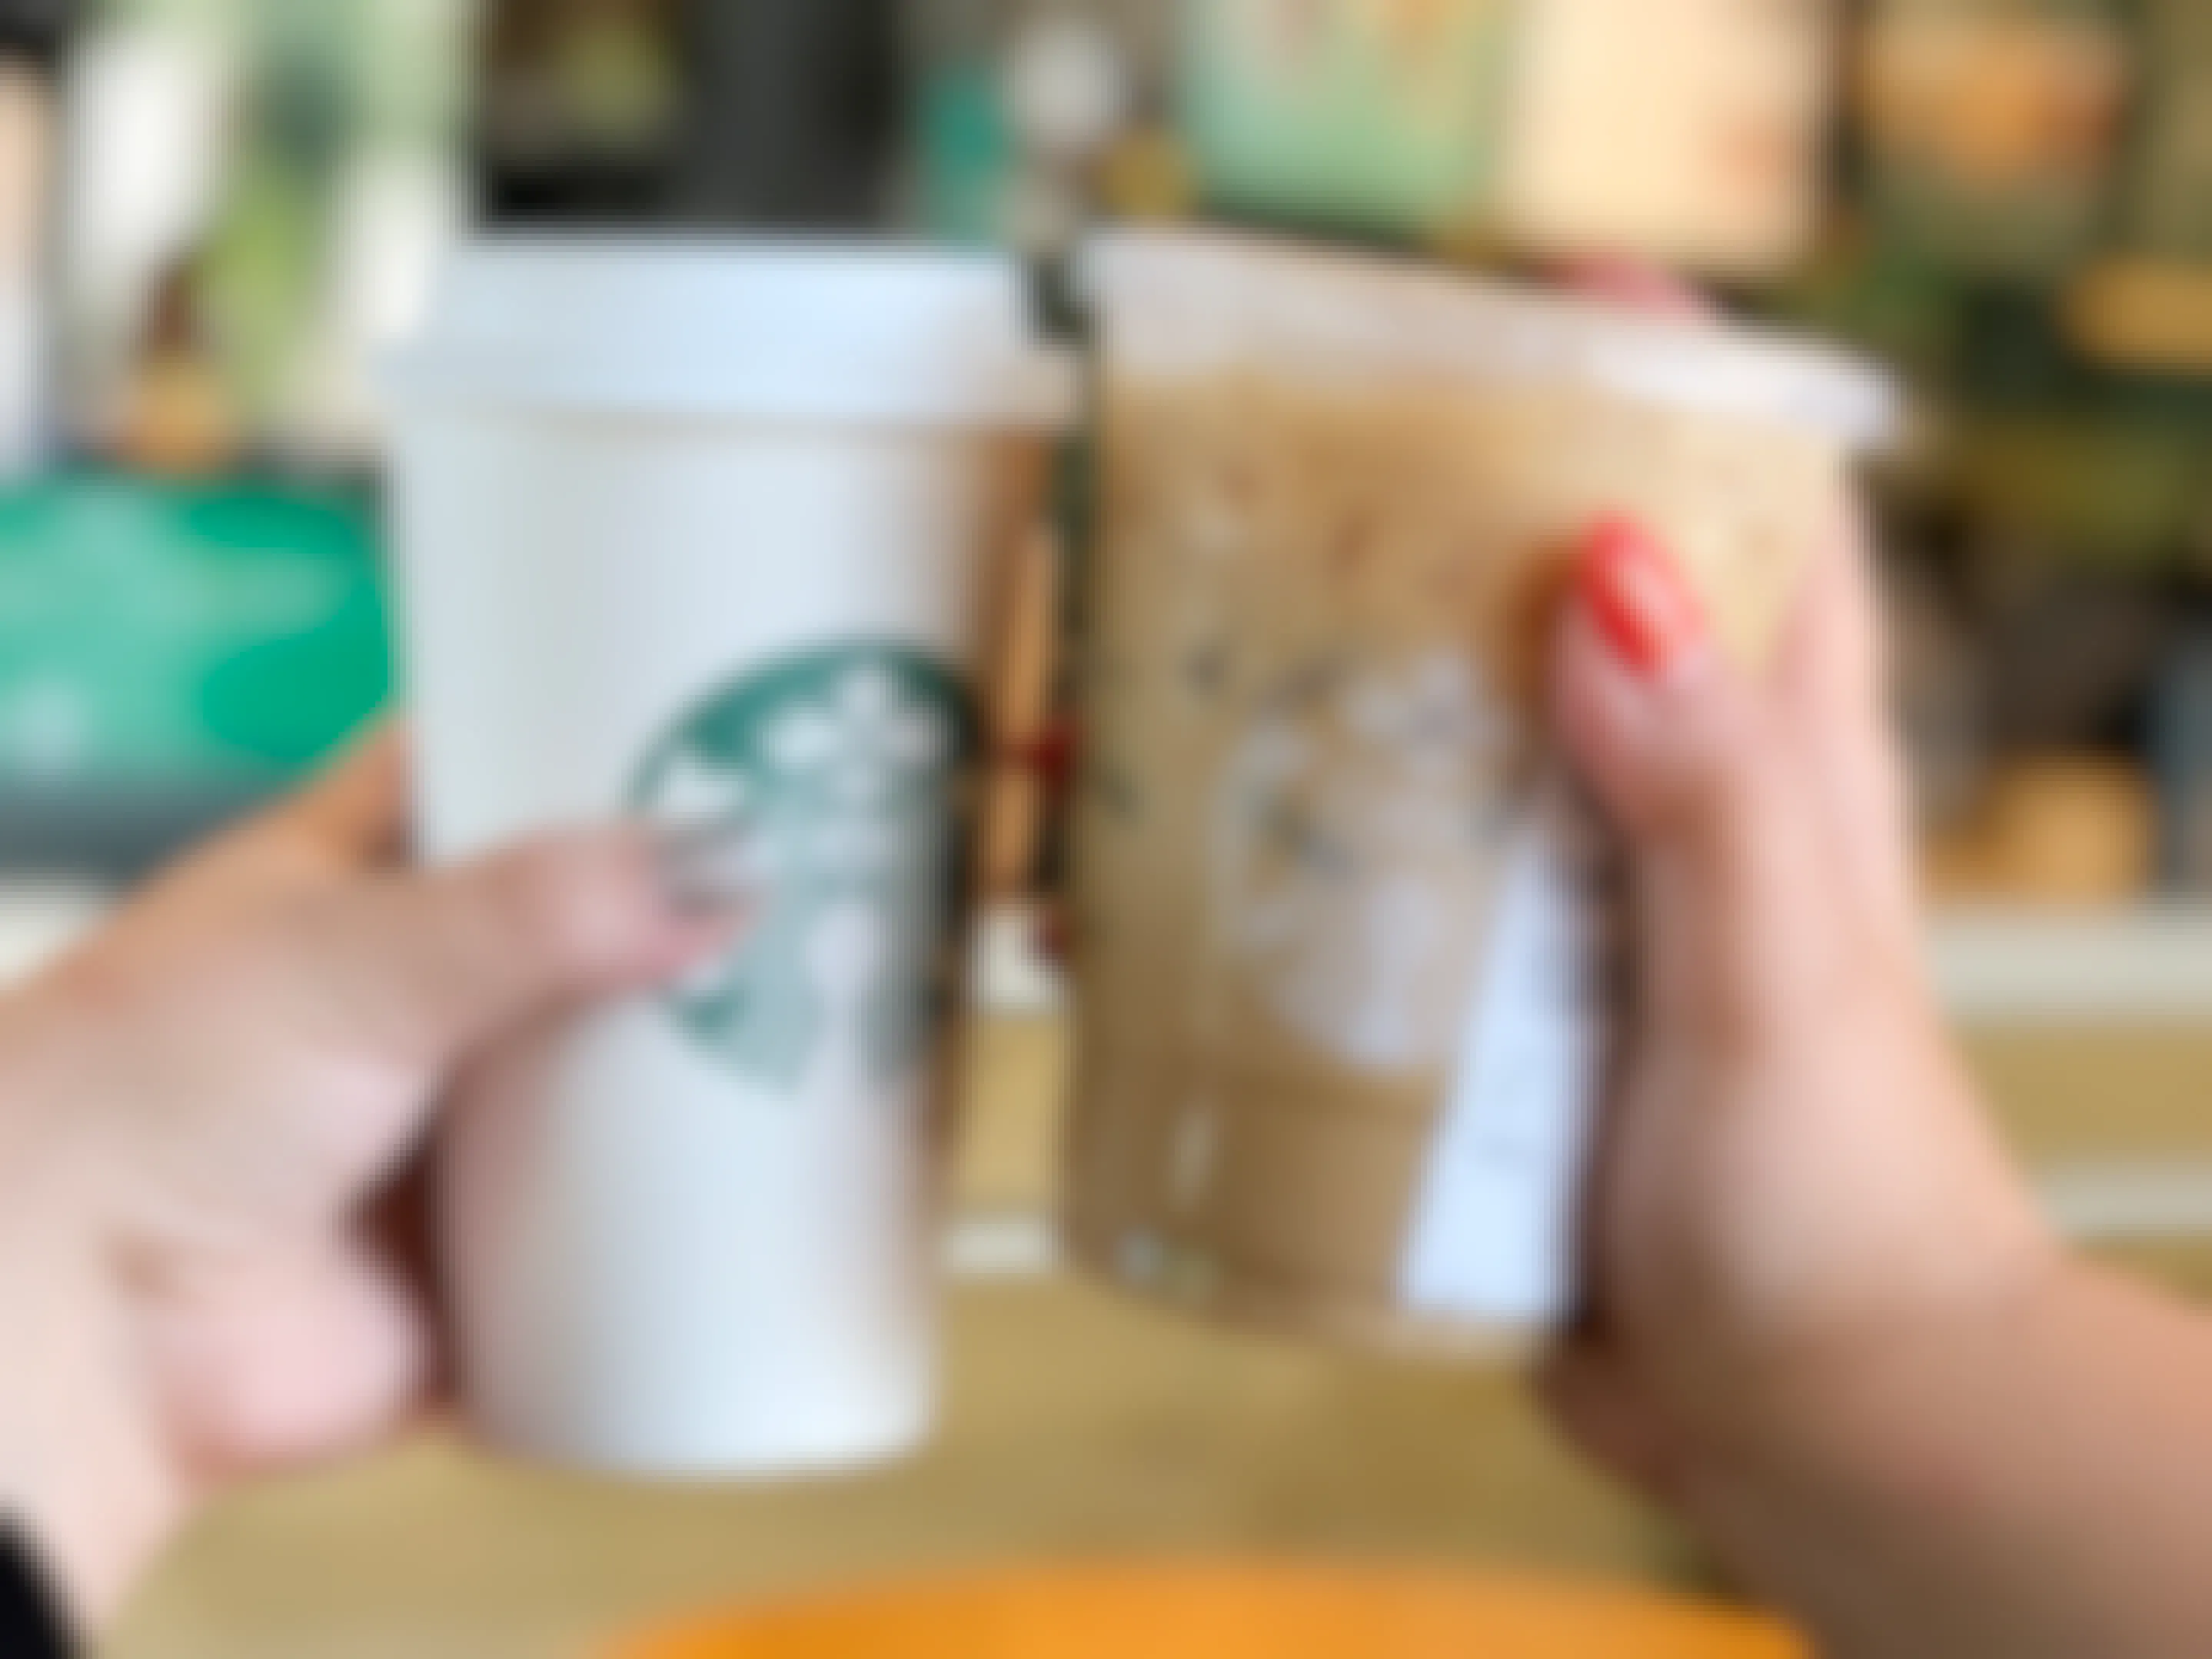 Two people's hands holding two Starbucks drinks up together.